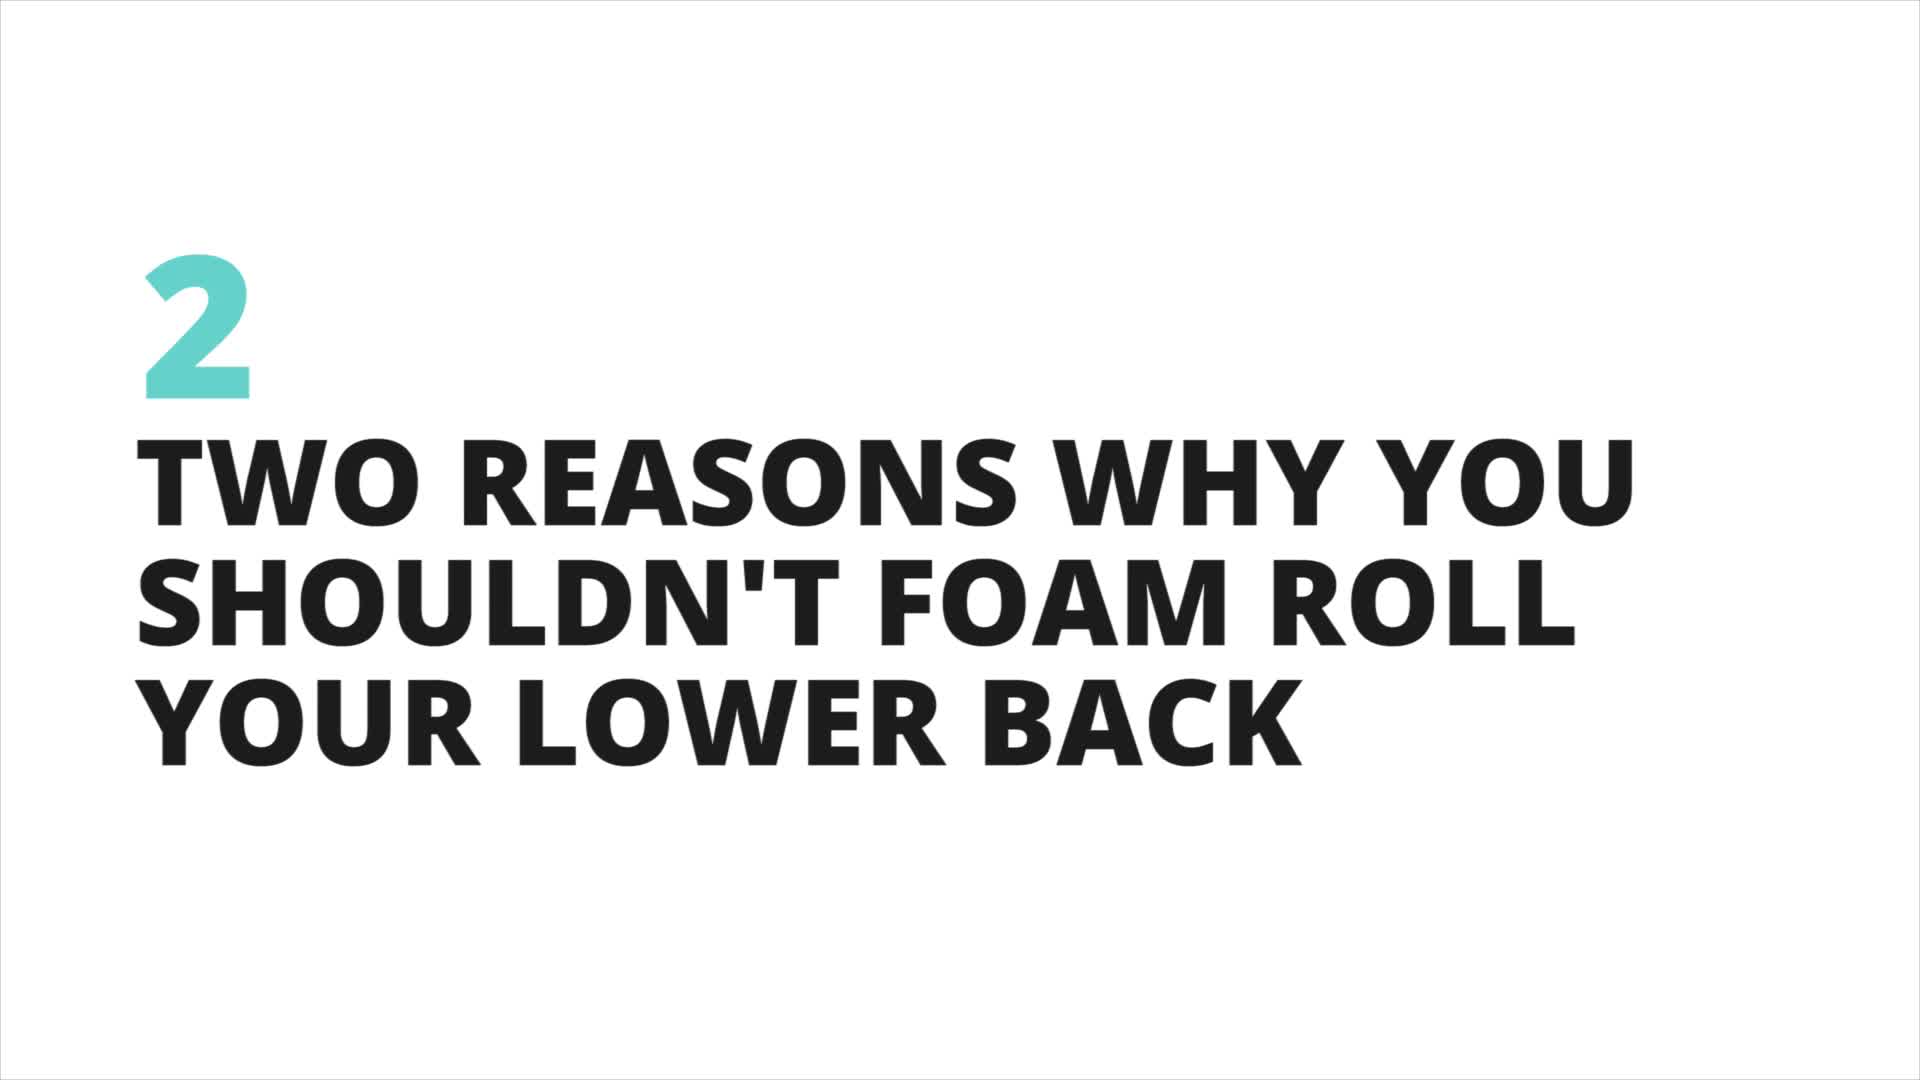 How To Properly Foam Roll For Lower Back Pain Relief - Coach Sofia